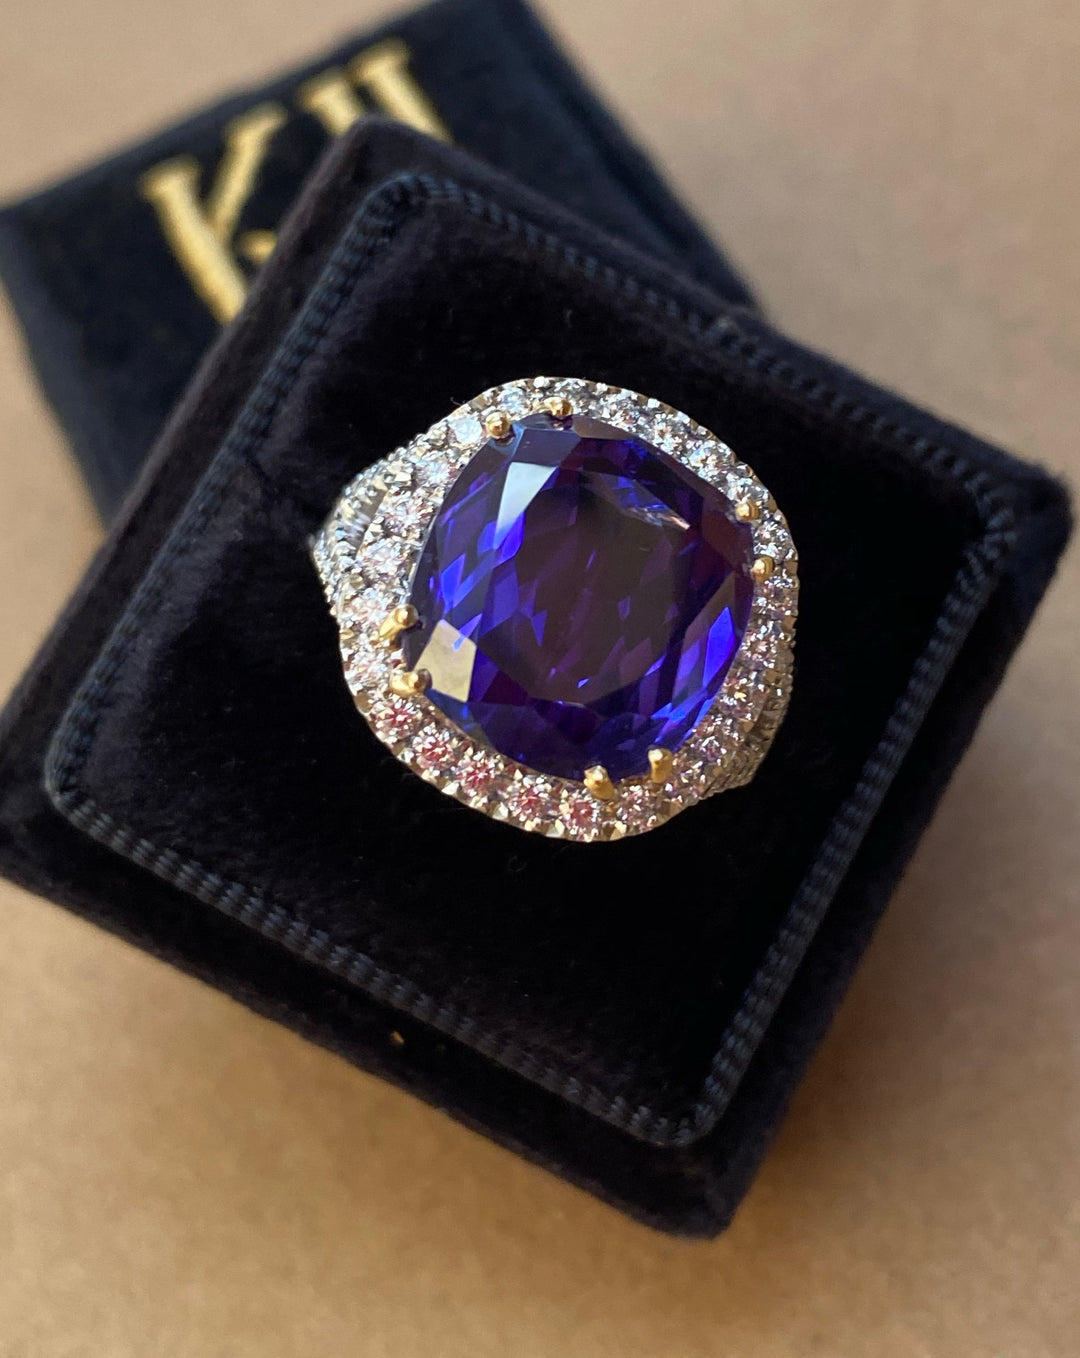 12 Carat Cushion Cut Tanzanite and Diamond Cocktail Engagement Ring in White Gold 